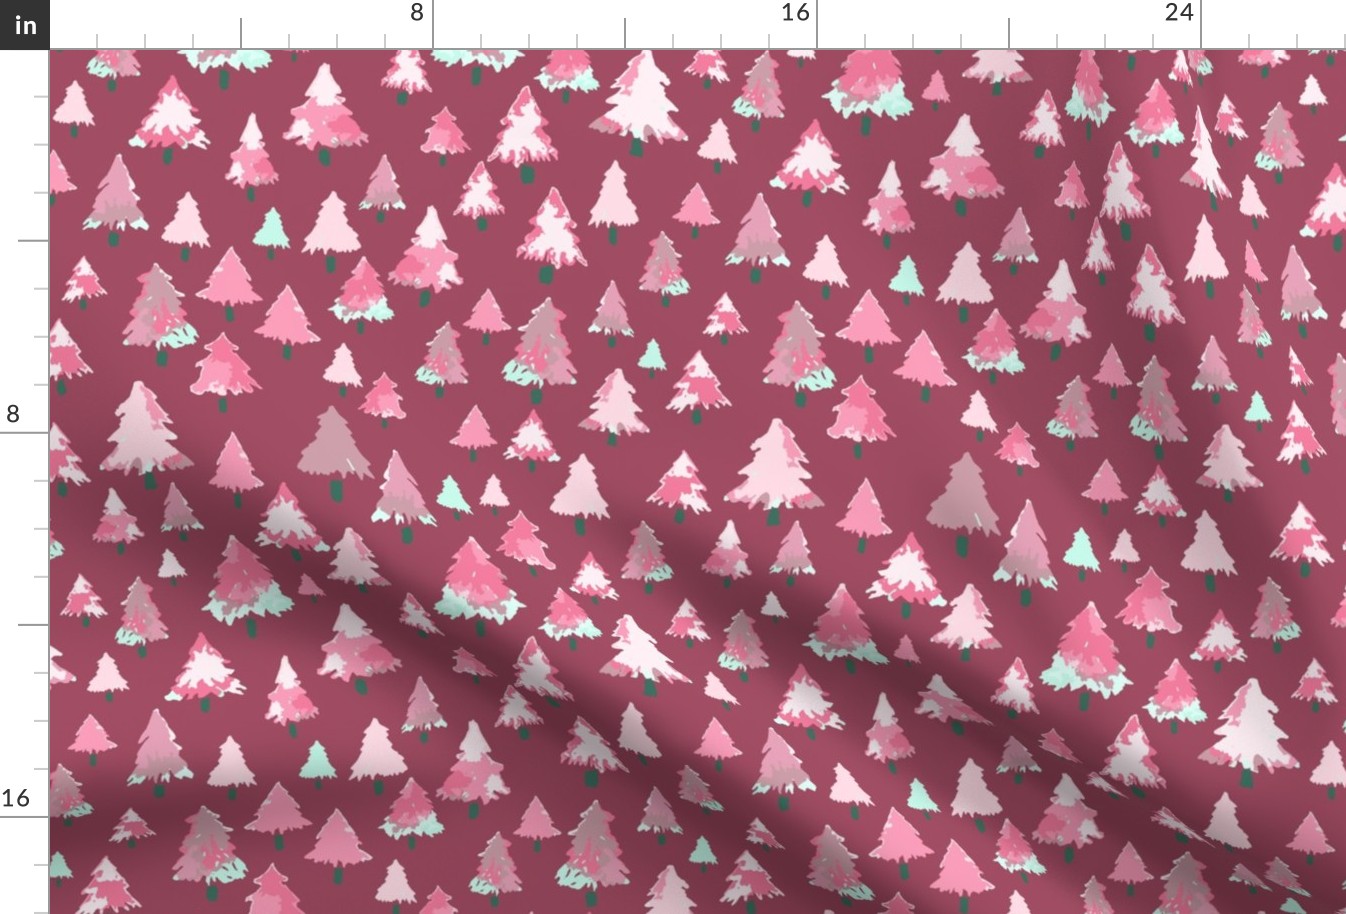 579a - Medium scale Christmas trees in organic hand painted baby pink, maroon and teal watercolour, for kids/children decor, rustic cabin pillows and table runners, children’s autumn apparel, fall decor